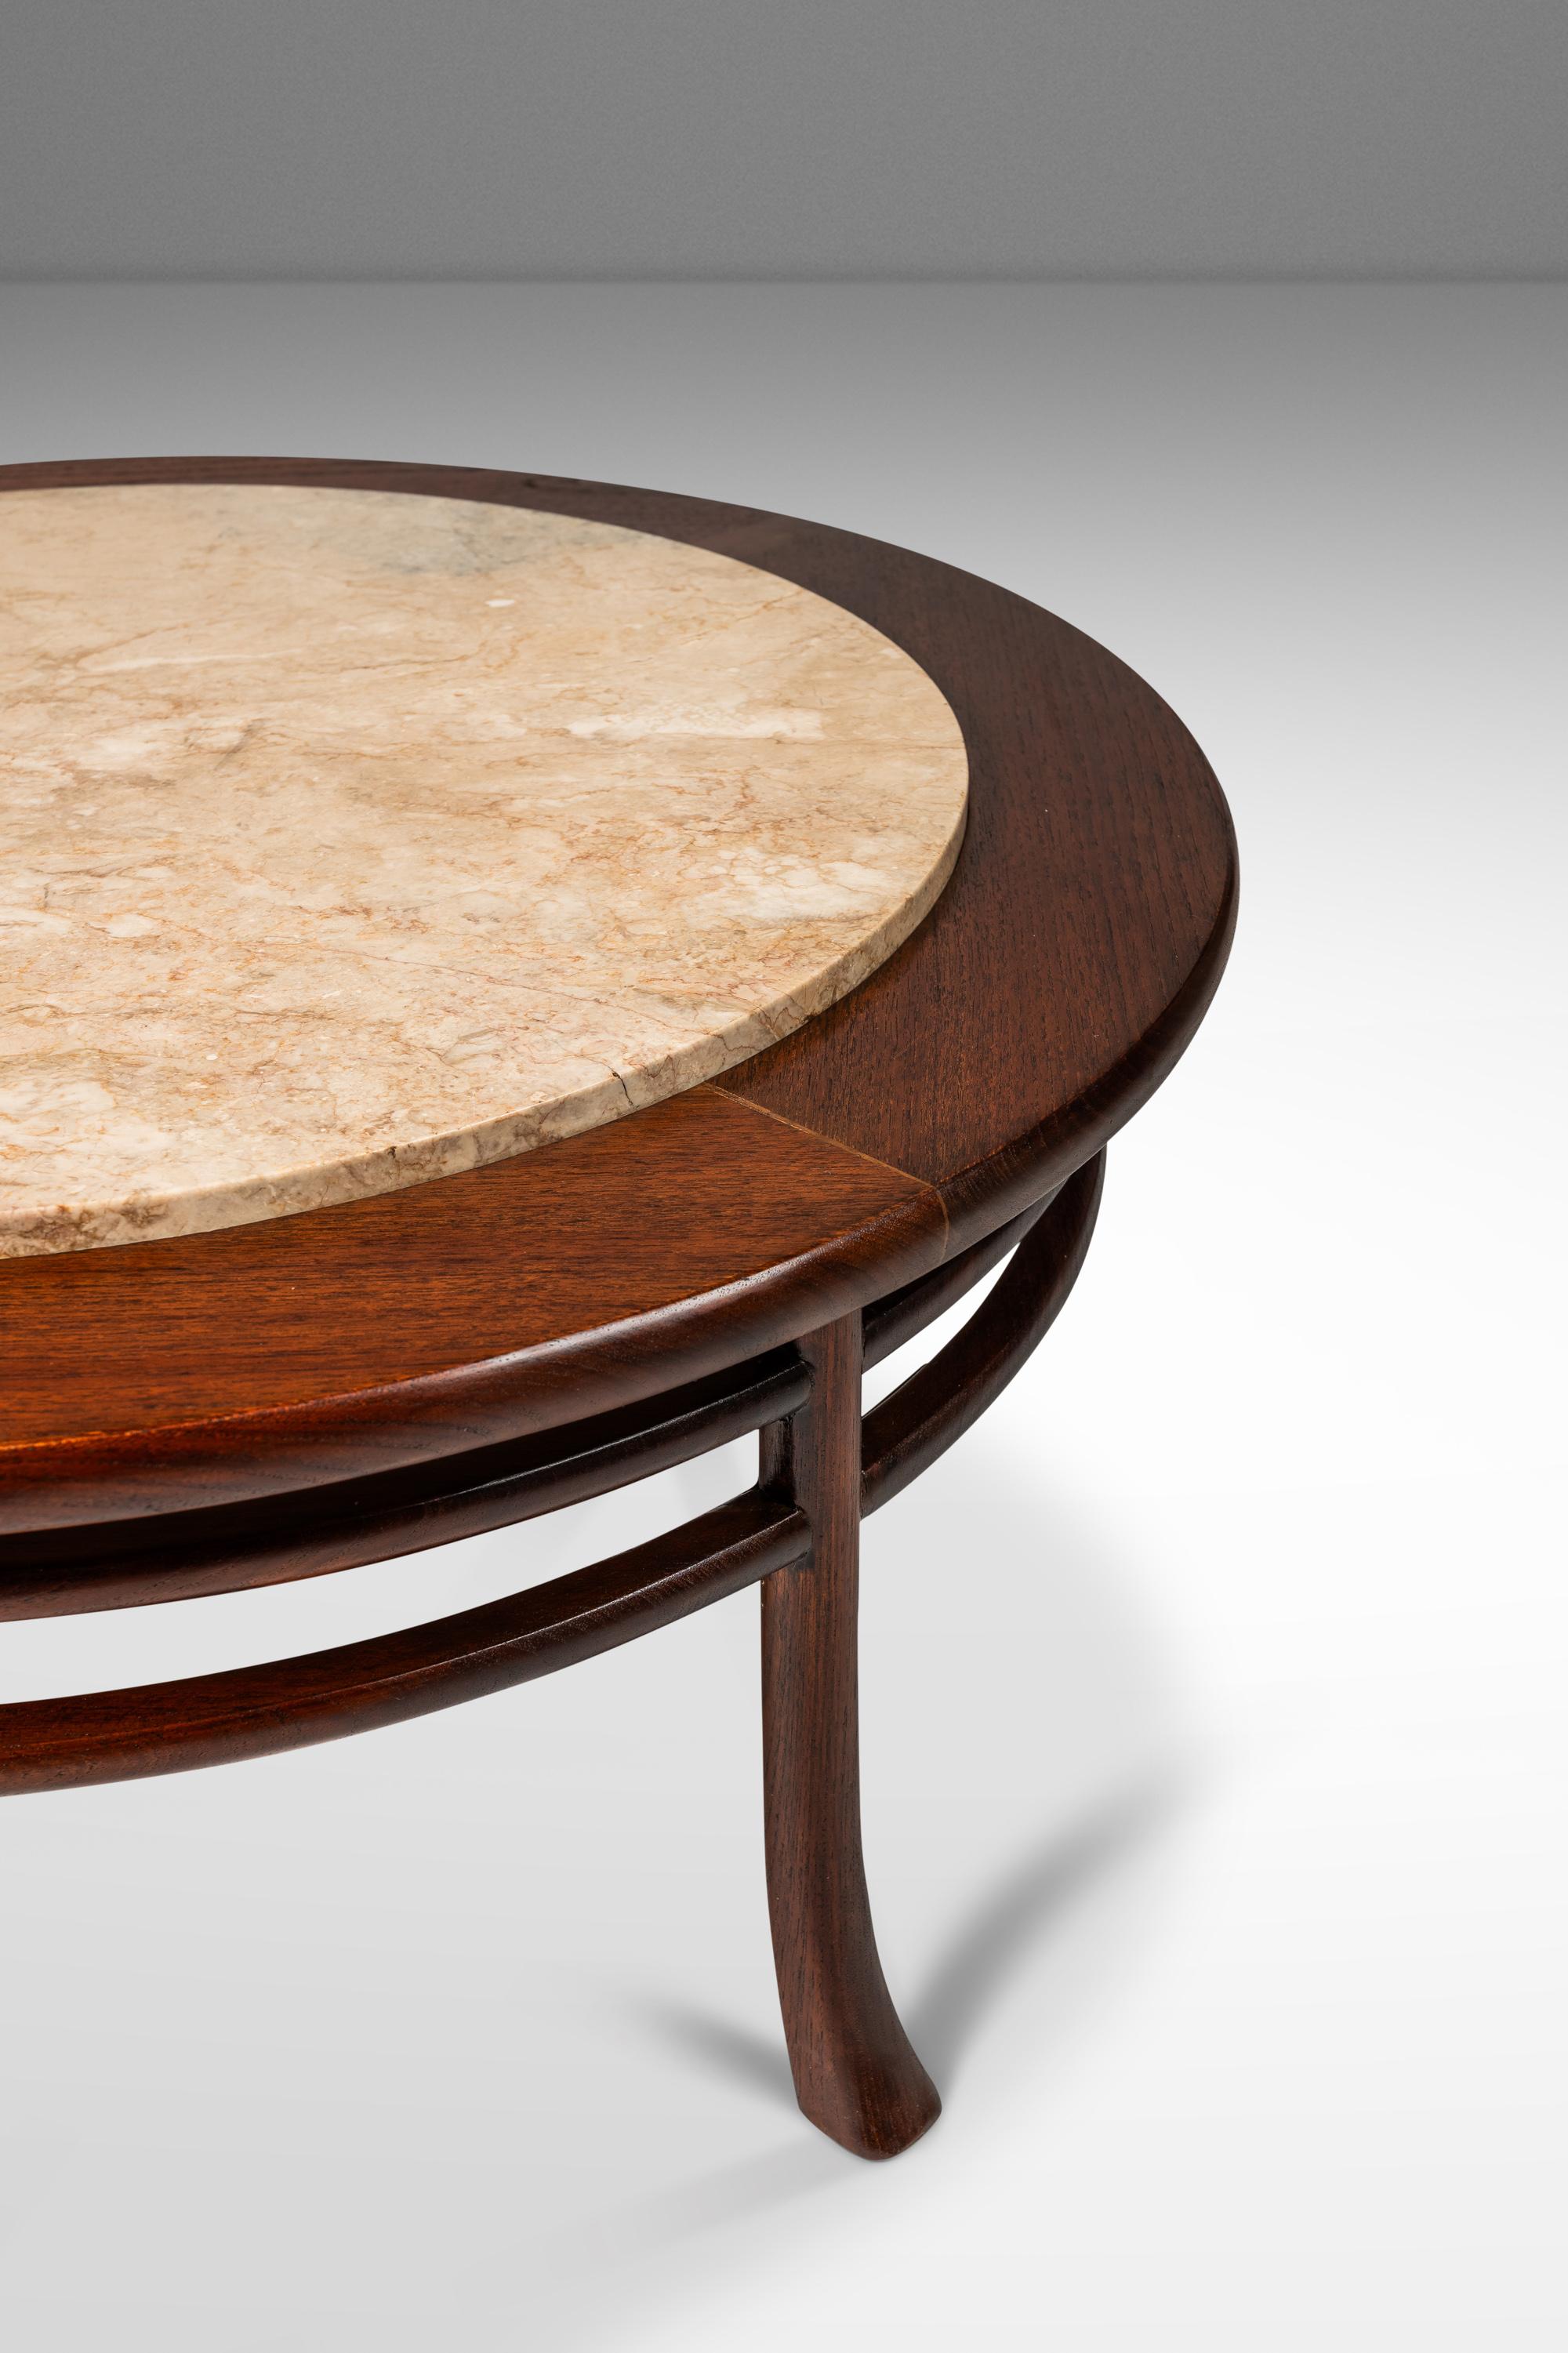 Walnut Coffee Table w/ Travertine Top Attributed to T.H. Robsjohn Gibbings, 1950 For Sale 7